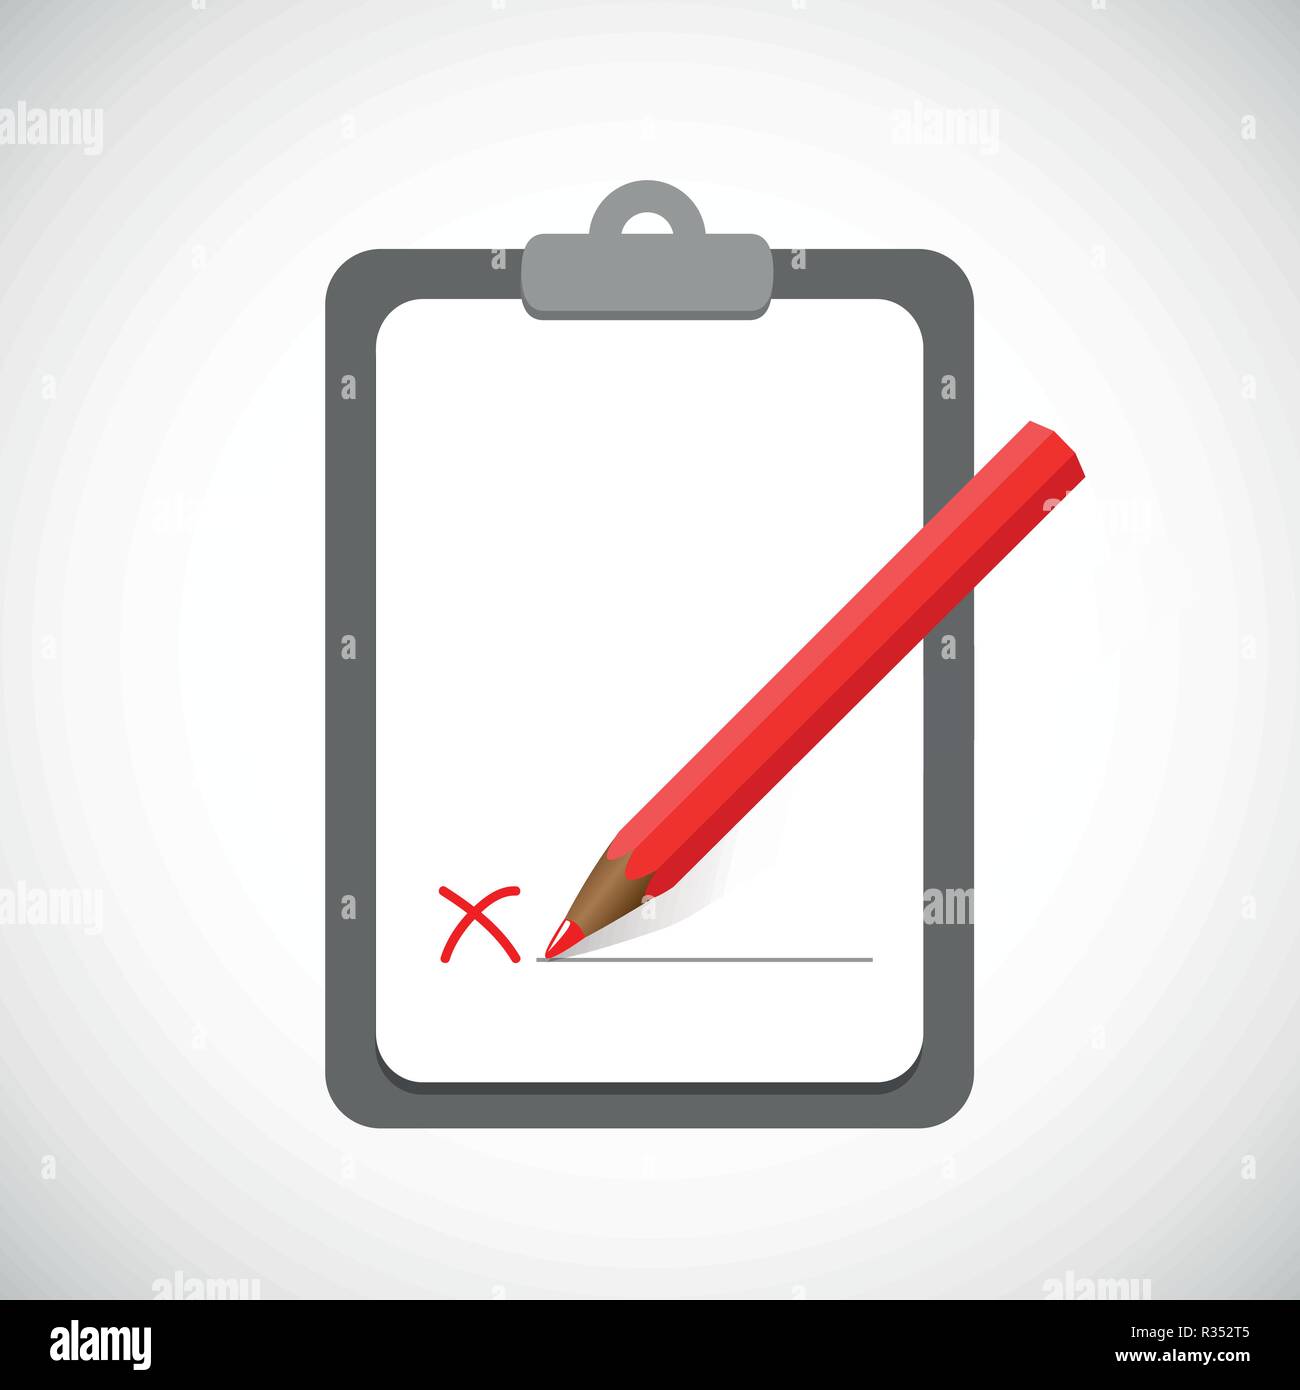 clipboard with red pen business design vector illustration Stock Vector